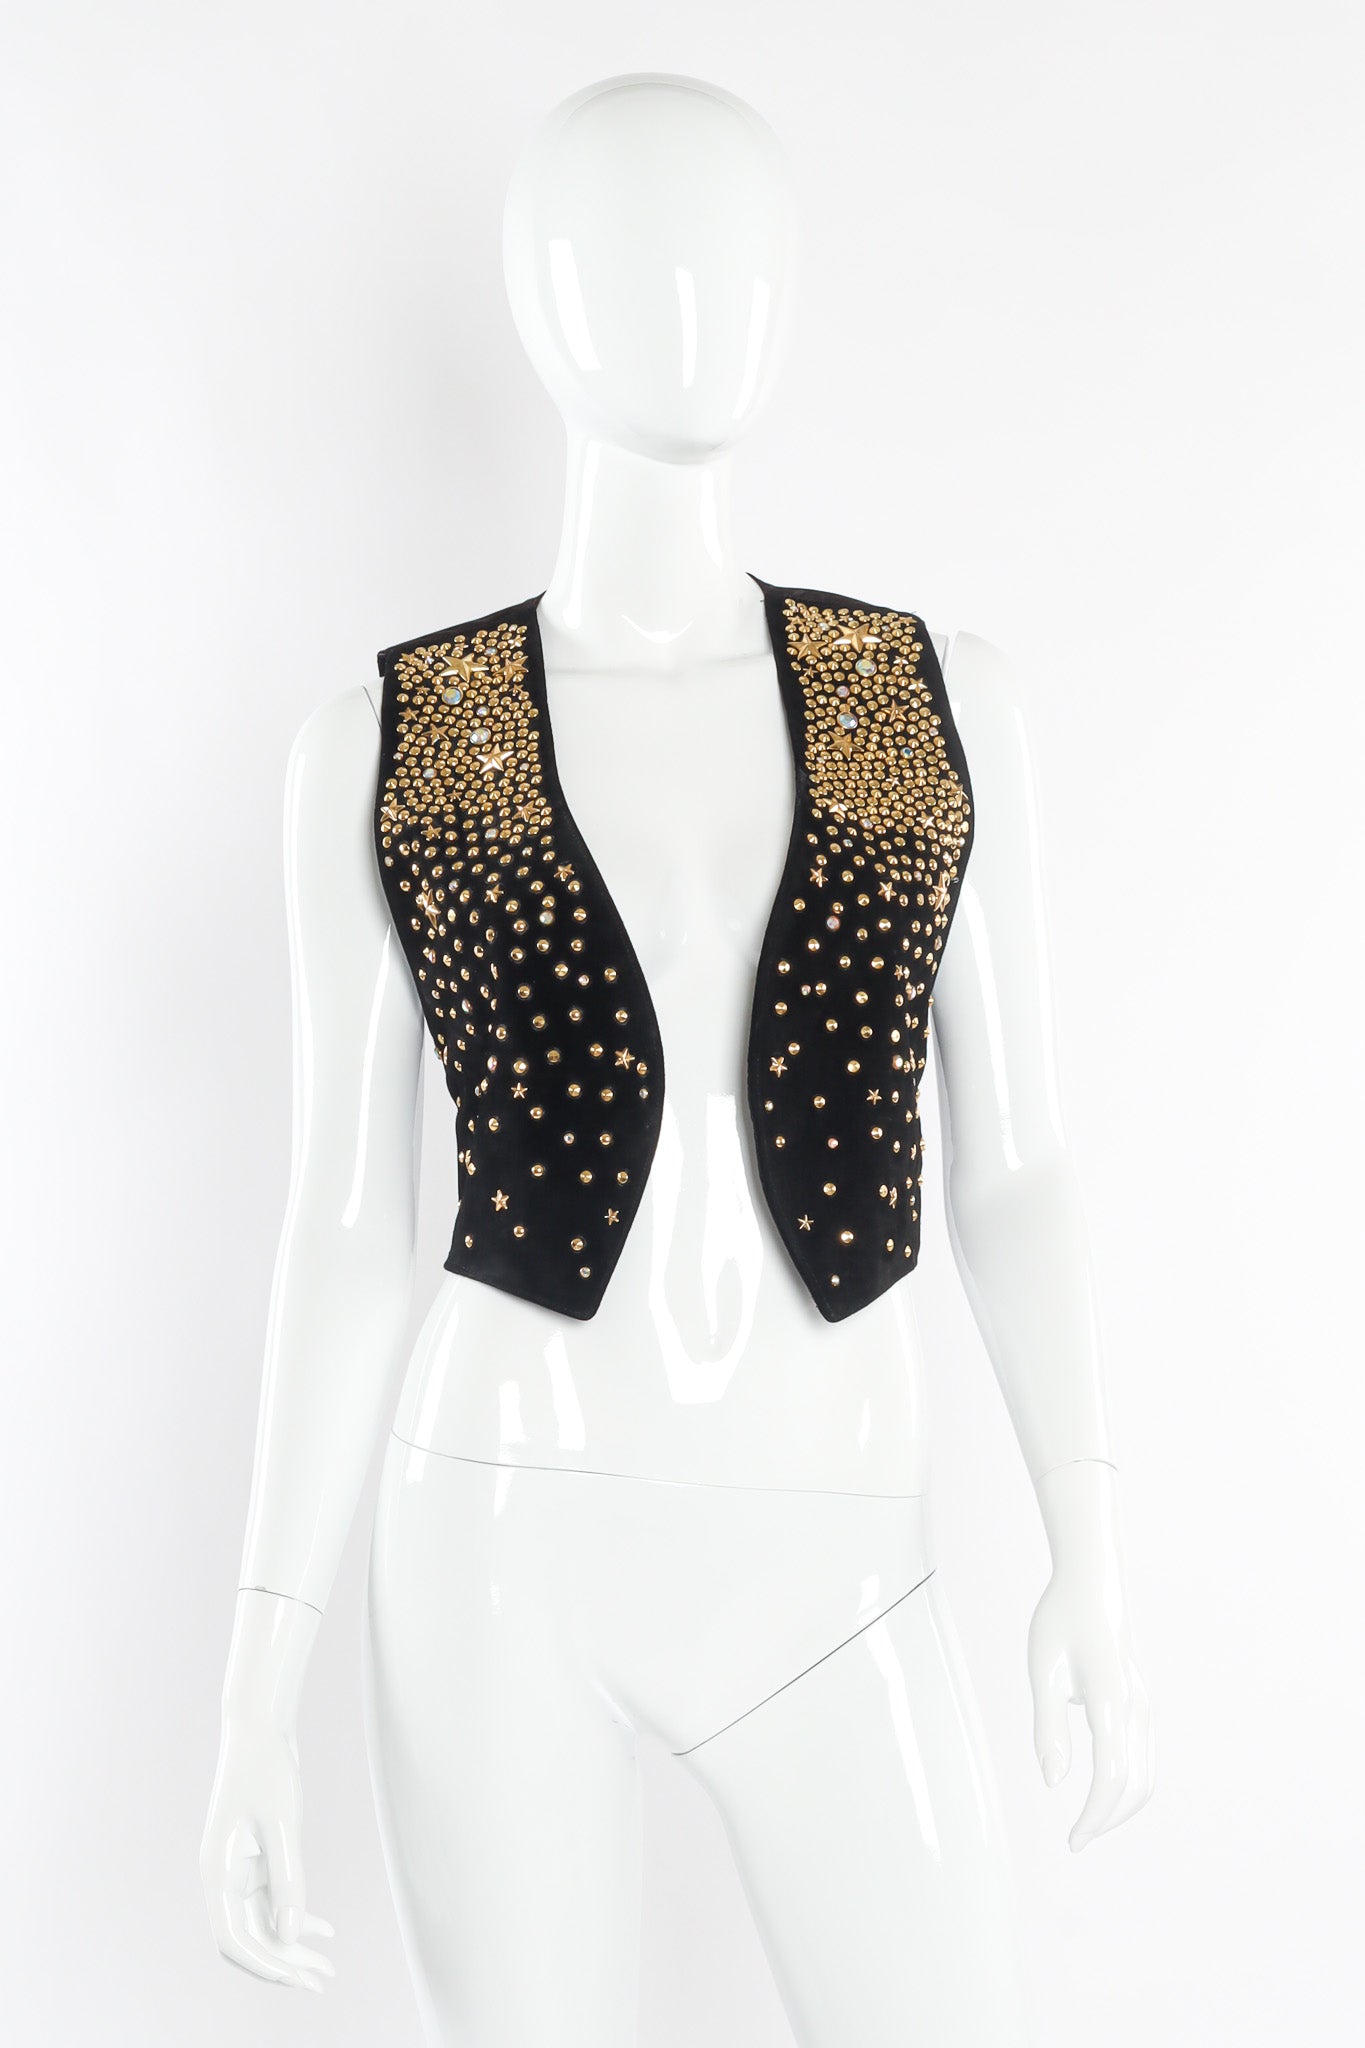 Leather vest with eclectic star and opalescent studs by K.Baumann front mannequin view photo @recessla